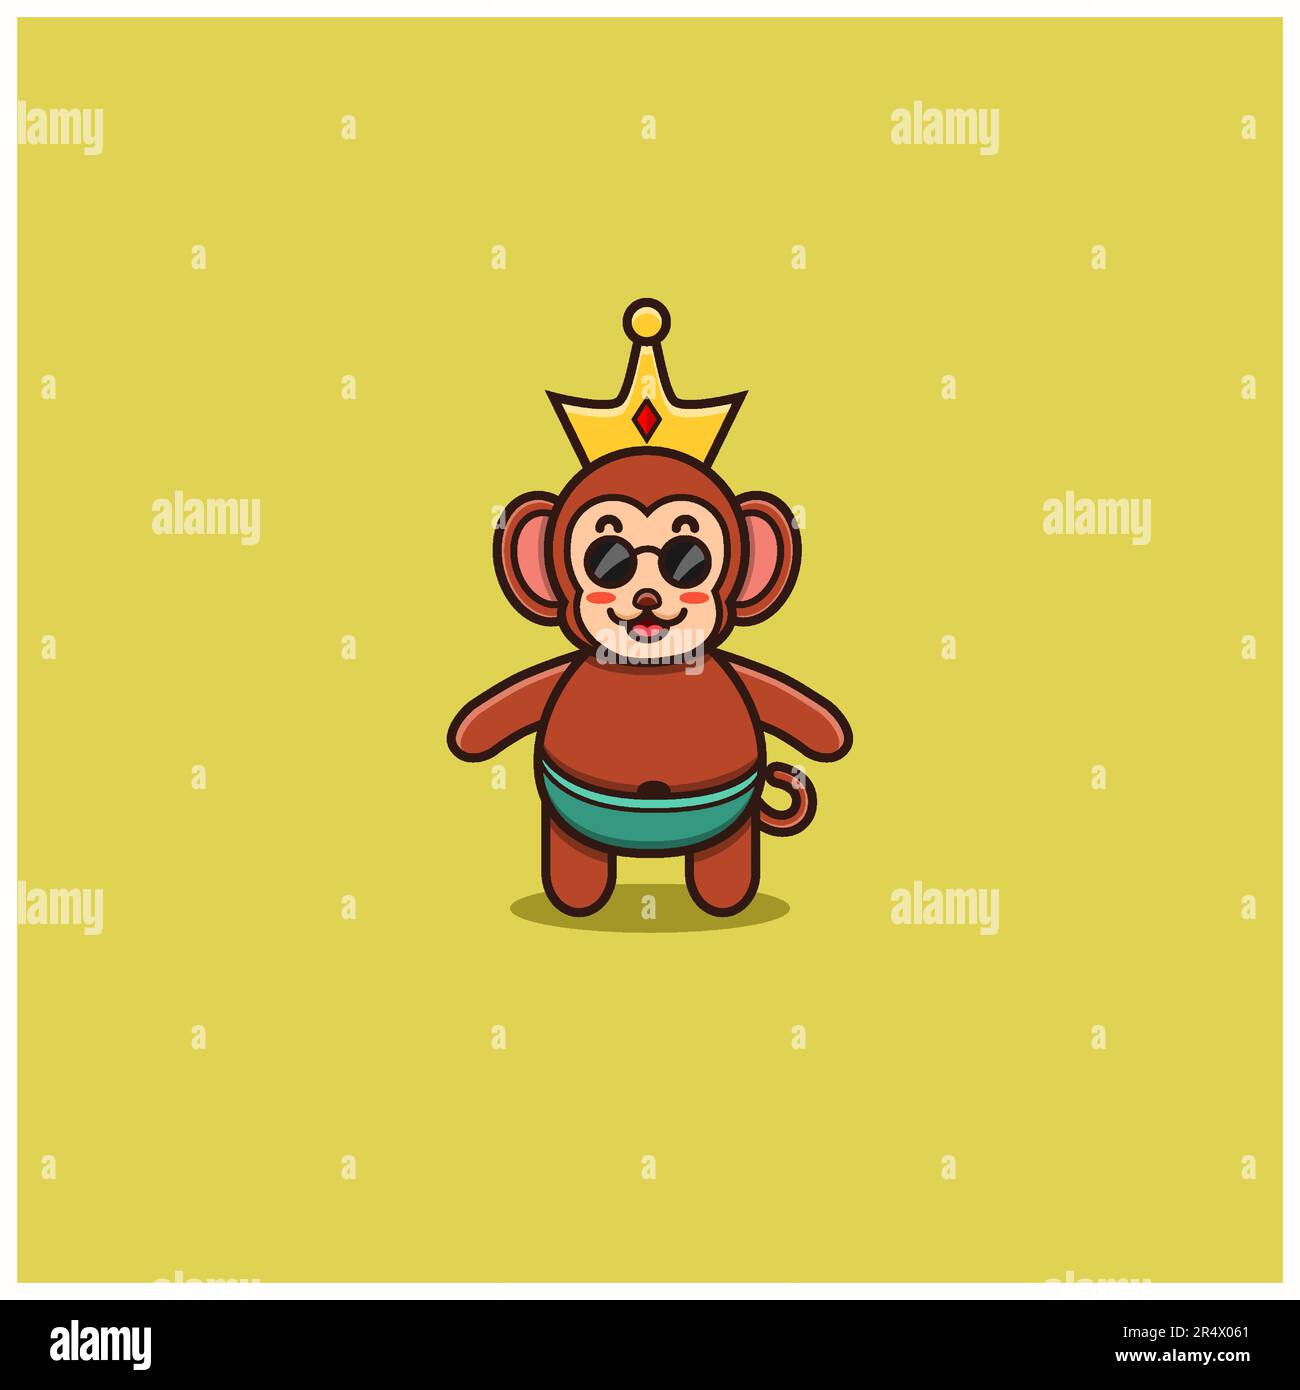 Cute Baby Monkey King. Character, Mascot, Logo, Cartoon, Icon, and Cute Design. Vector and Illustration. Stock Vector